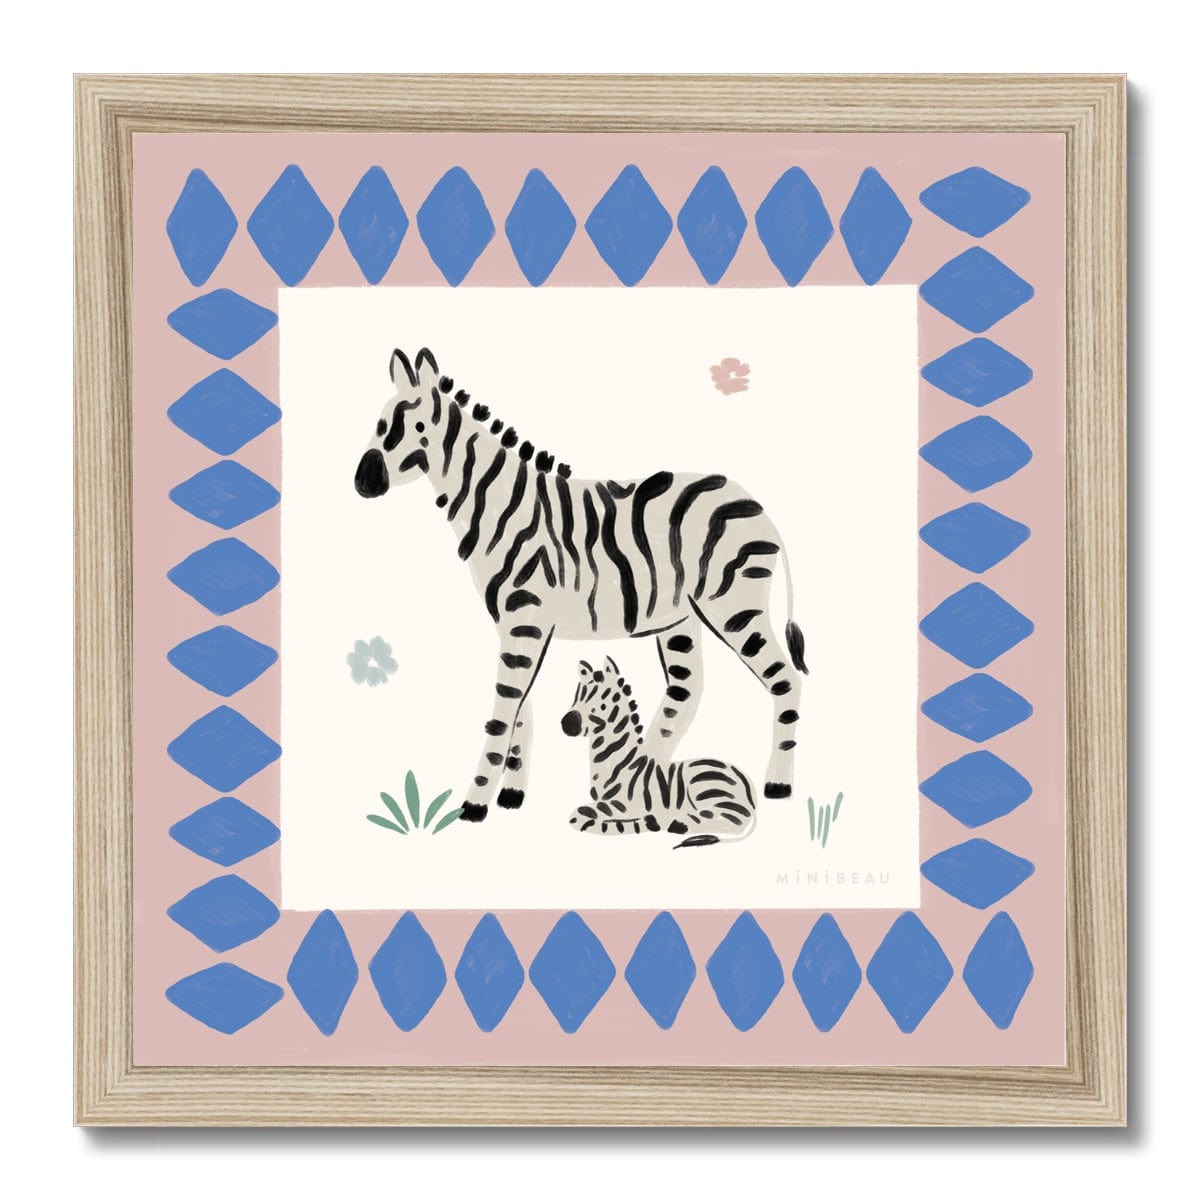 Hand-painted square picture of an adult and baby zebra, with the baby laying slightly under the standing adult both looking out into the same direction. 2 simple small flowers. are in the background, one pink, one blue, with 2 tufts of grass one at the front and one at the back of the giraffe. Around the zebras is a wide dusty pink border with blue diamonds in a natural wooden frame